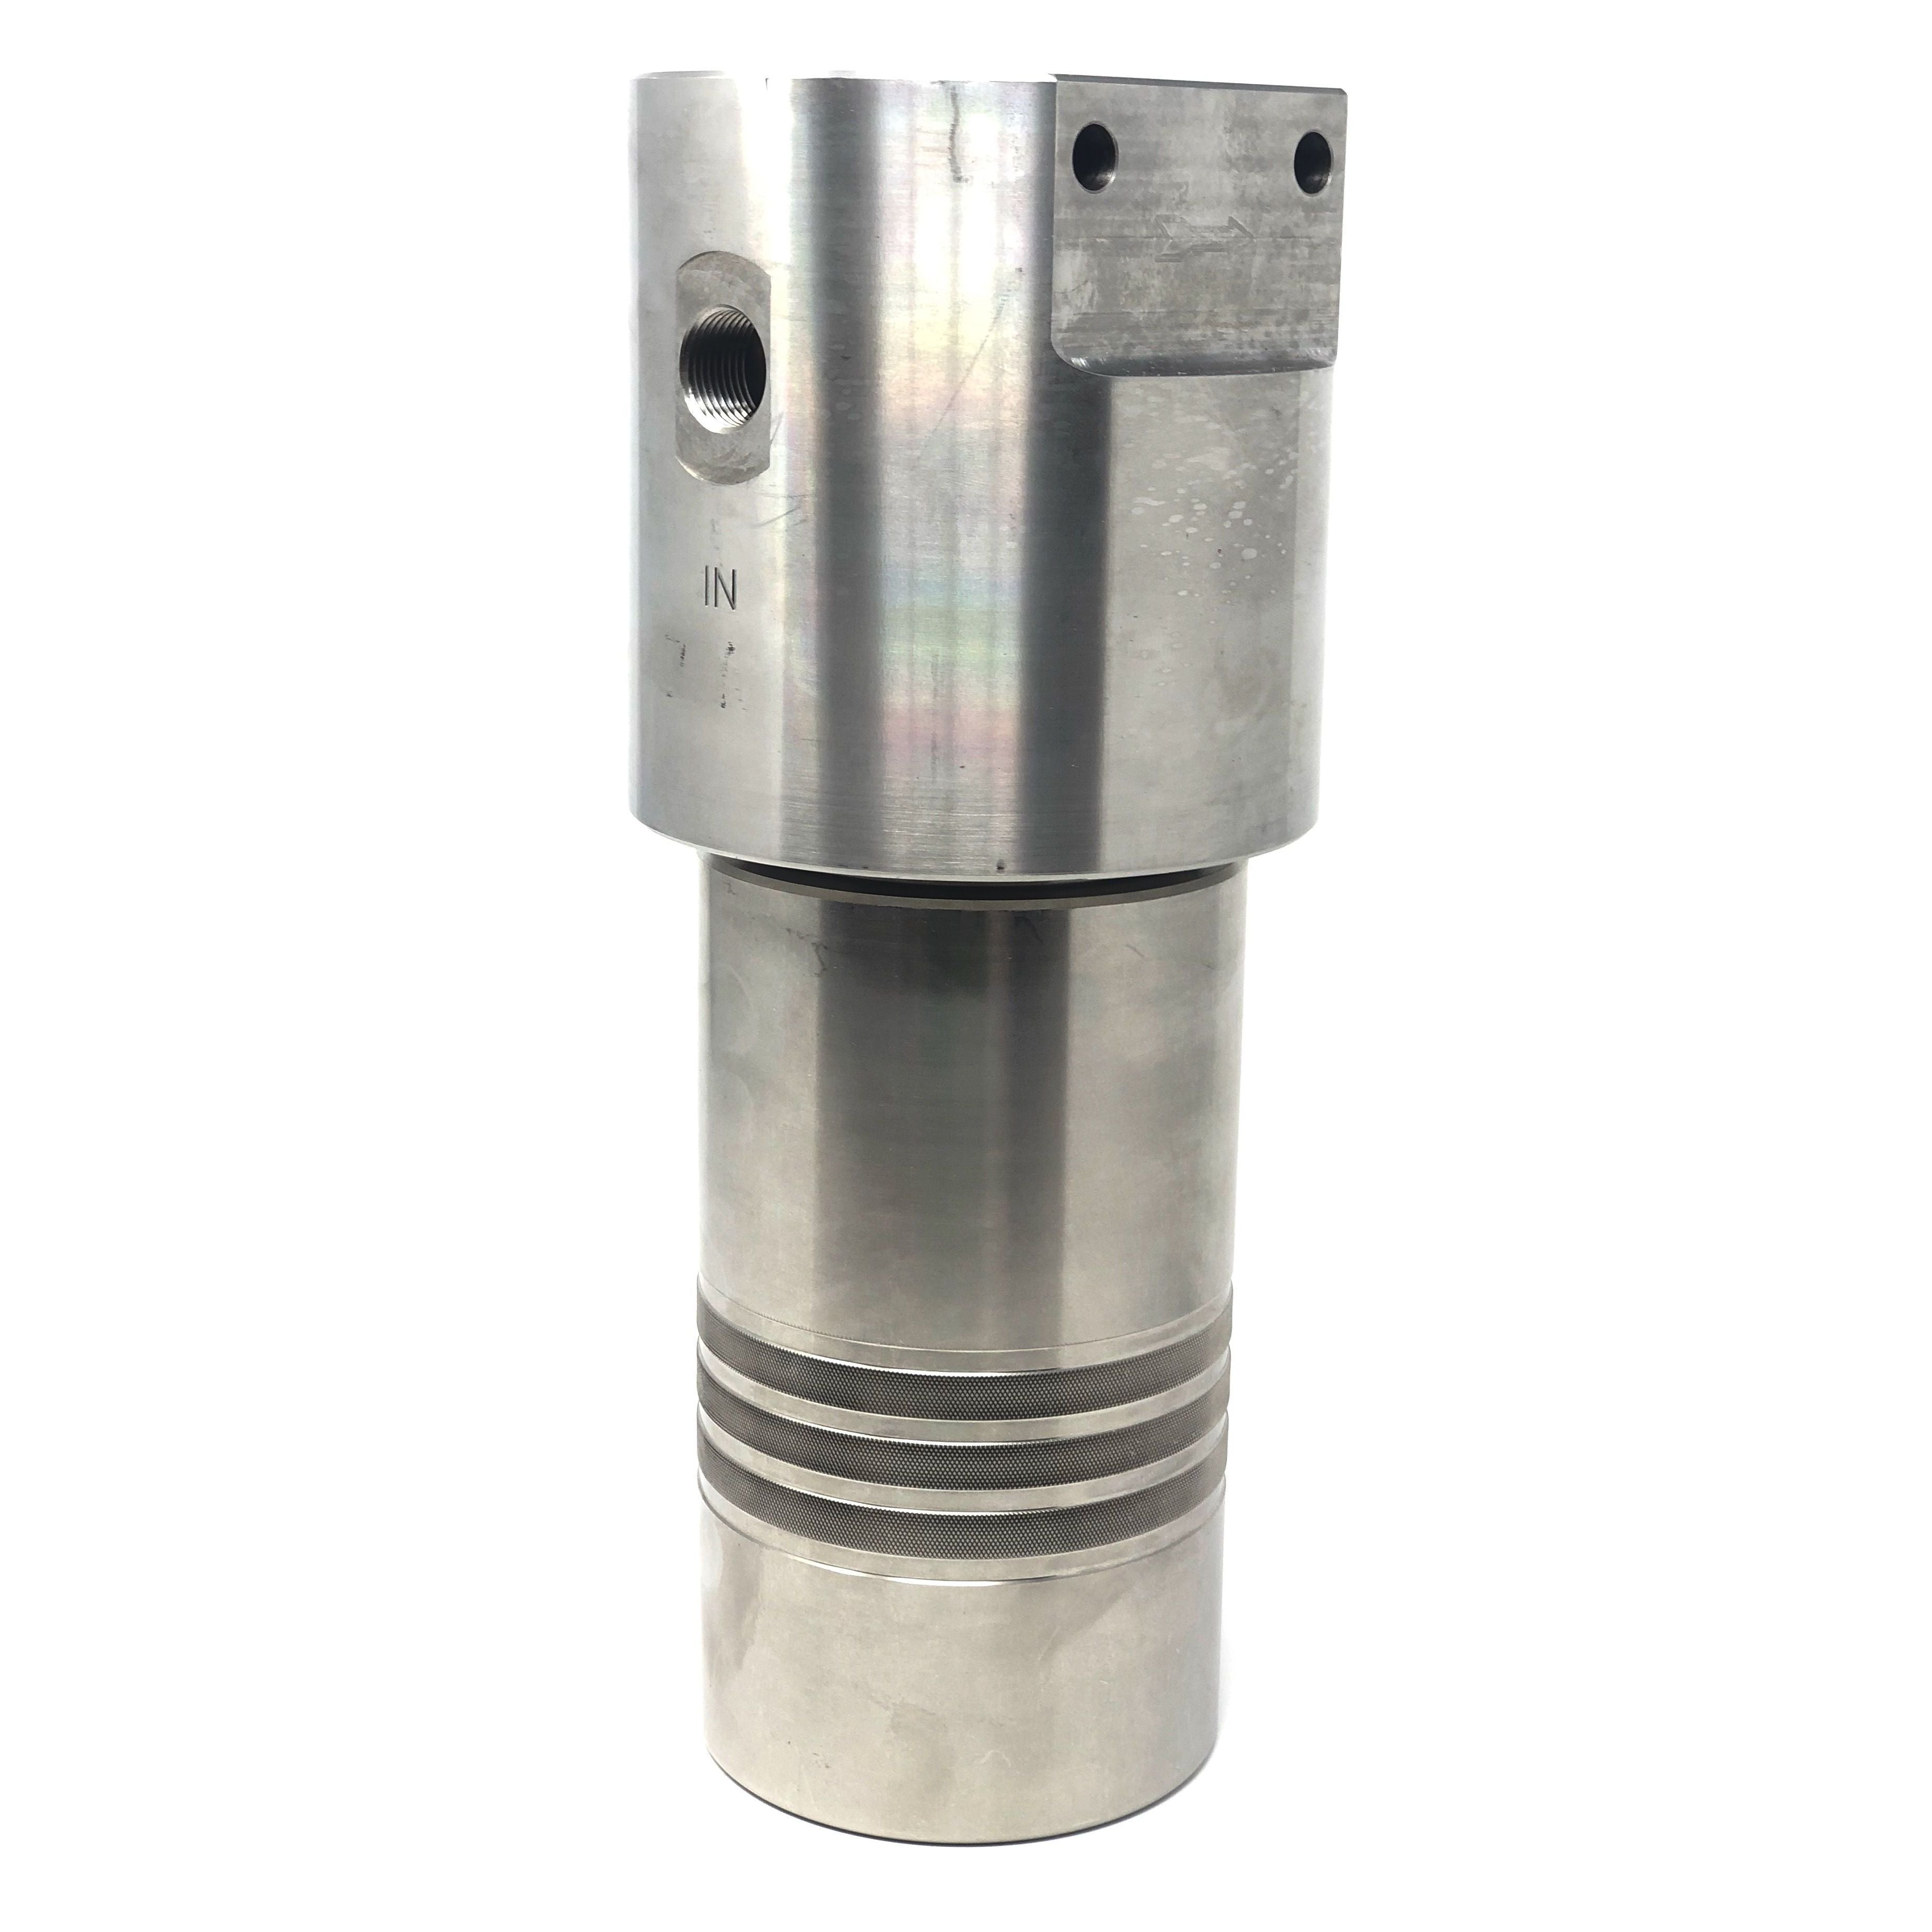 52S-248N-10SEN : Chase Ultra High Pressure Inline Filter, 10000psi, 1/2" NPT, 10 Micron, With Visual Indicator, No Bypass